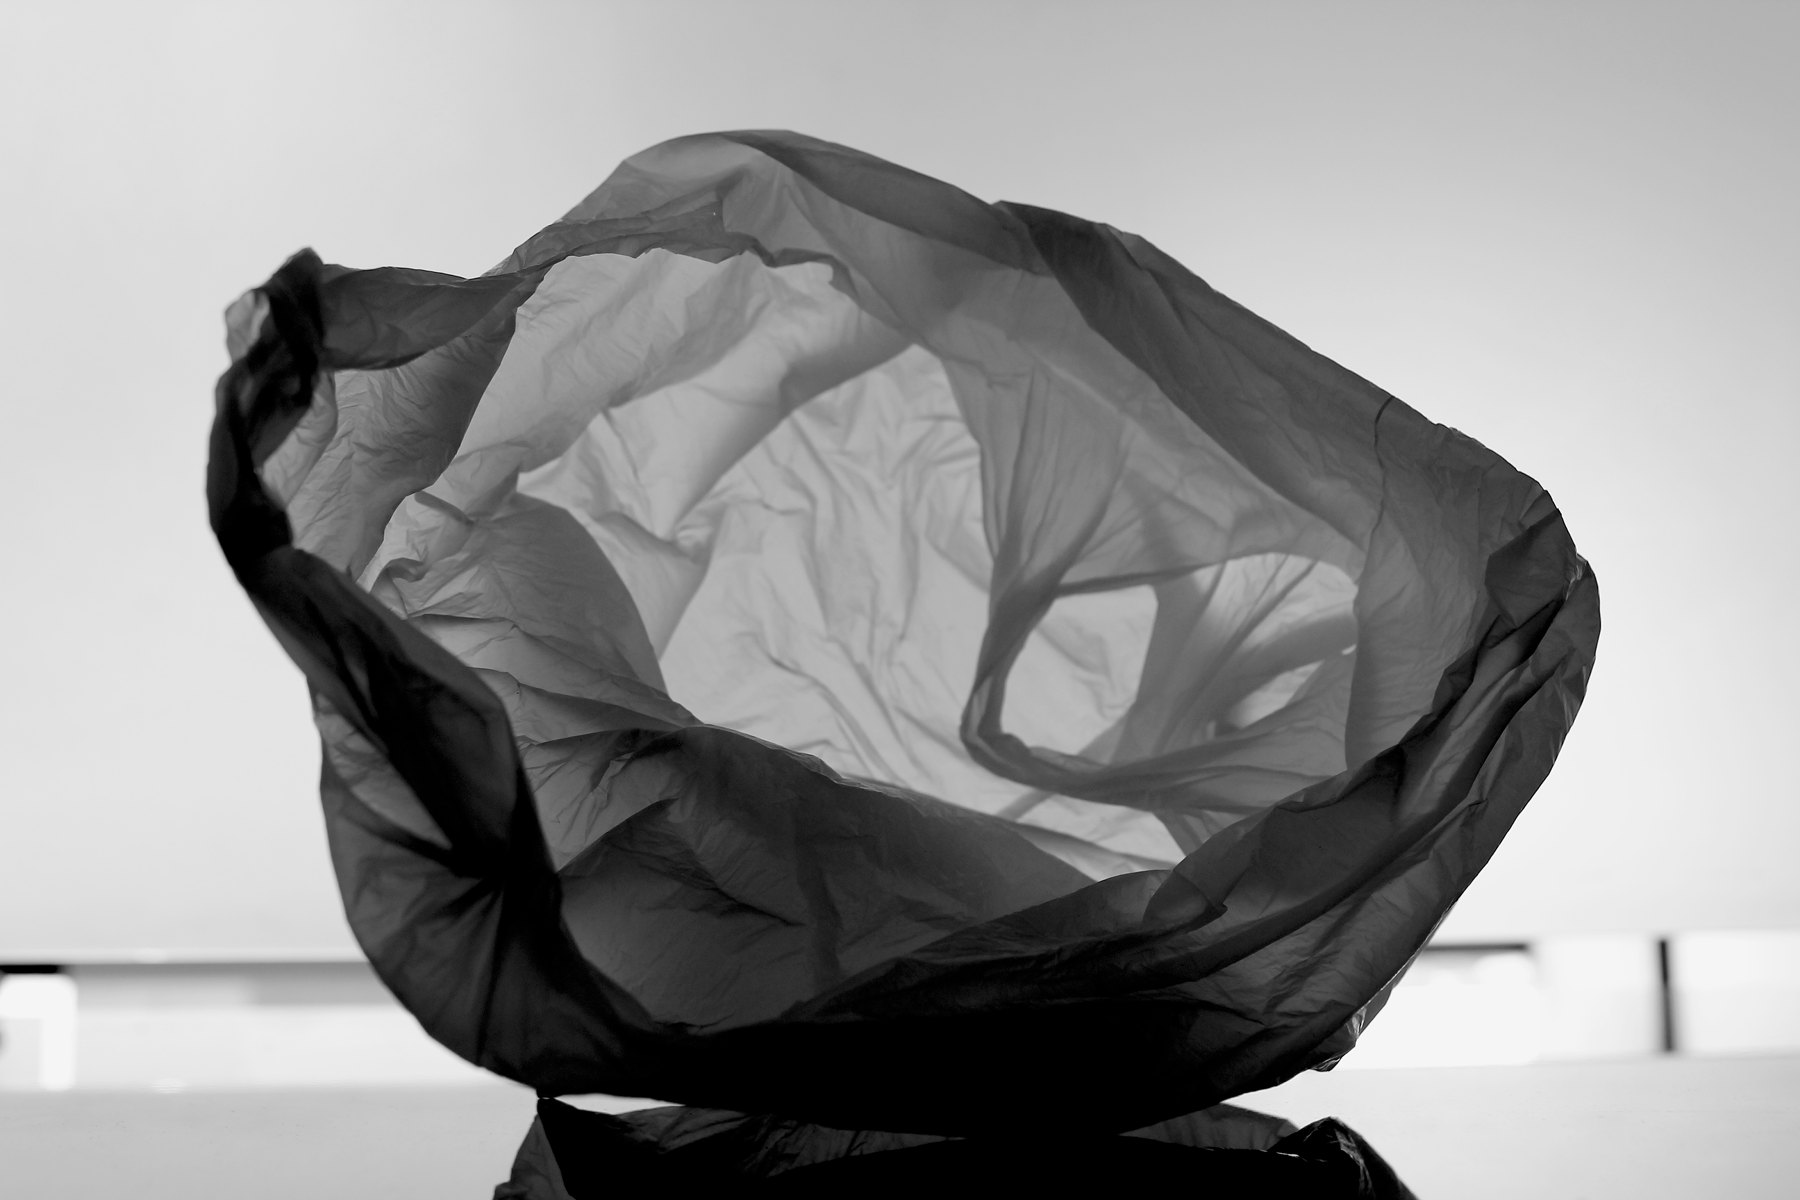 Title: A bag exposed | Author: Pulpolux !!! | Source: pulpolux on Flickr | License: CC BY-NC 2.0